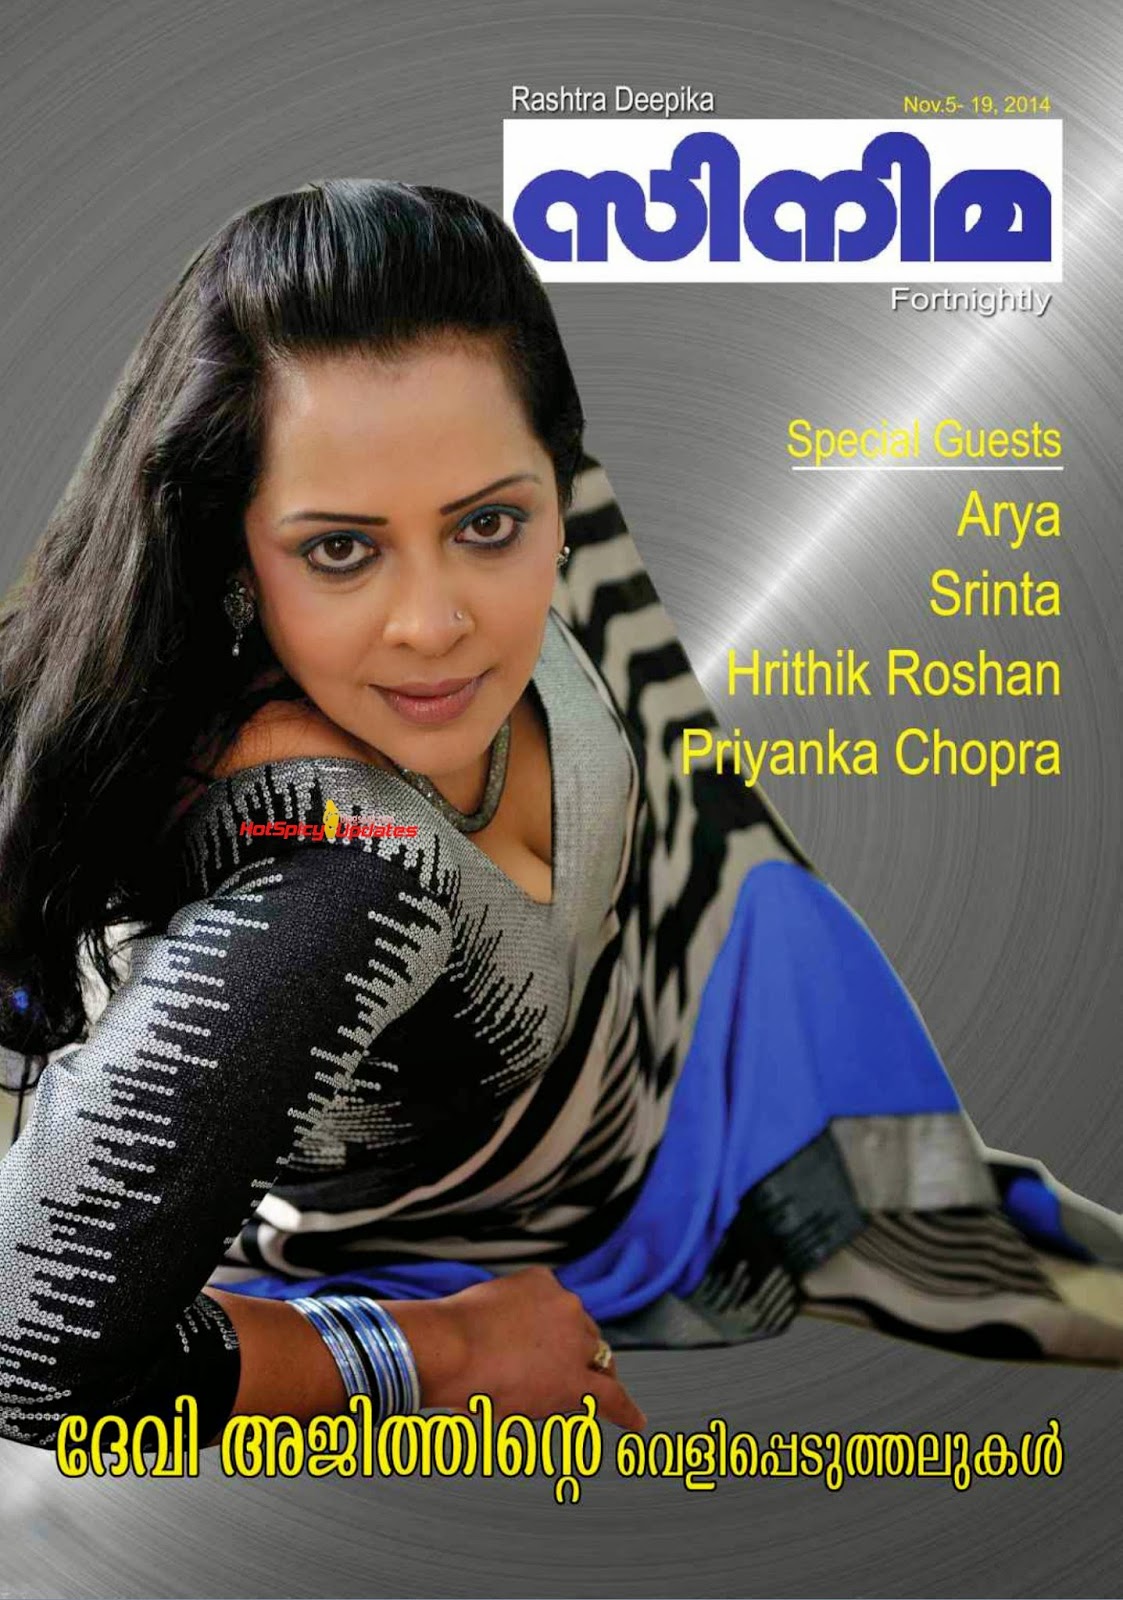 Devi Ajith On The Cover Page of Rashtra Deepika Cinema Magazine November  2014 | Latest High Quality Images of Actresses and Magazine Scans ~  HotSpicyUpdates